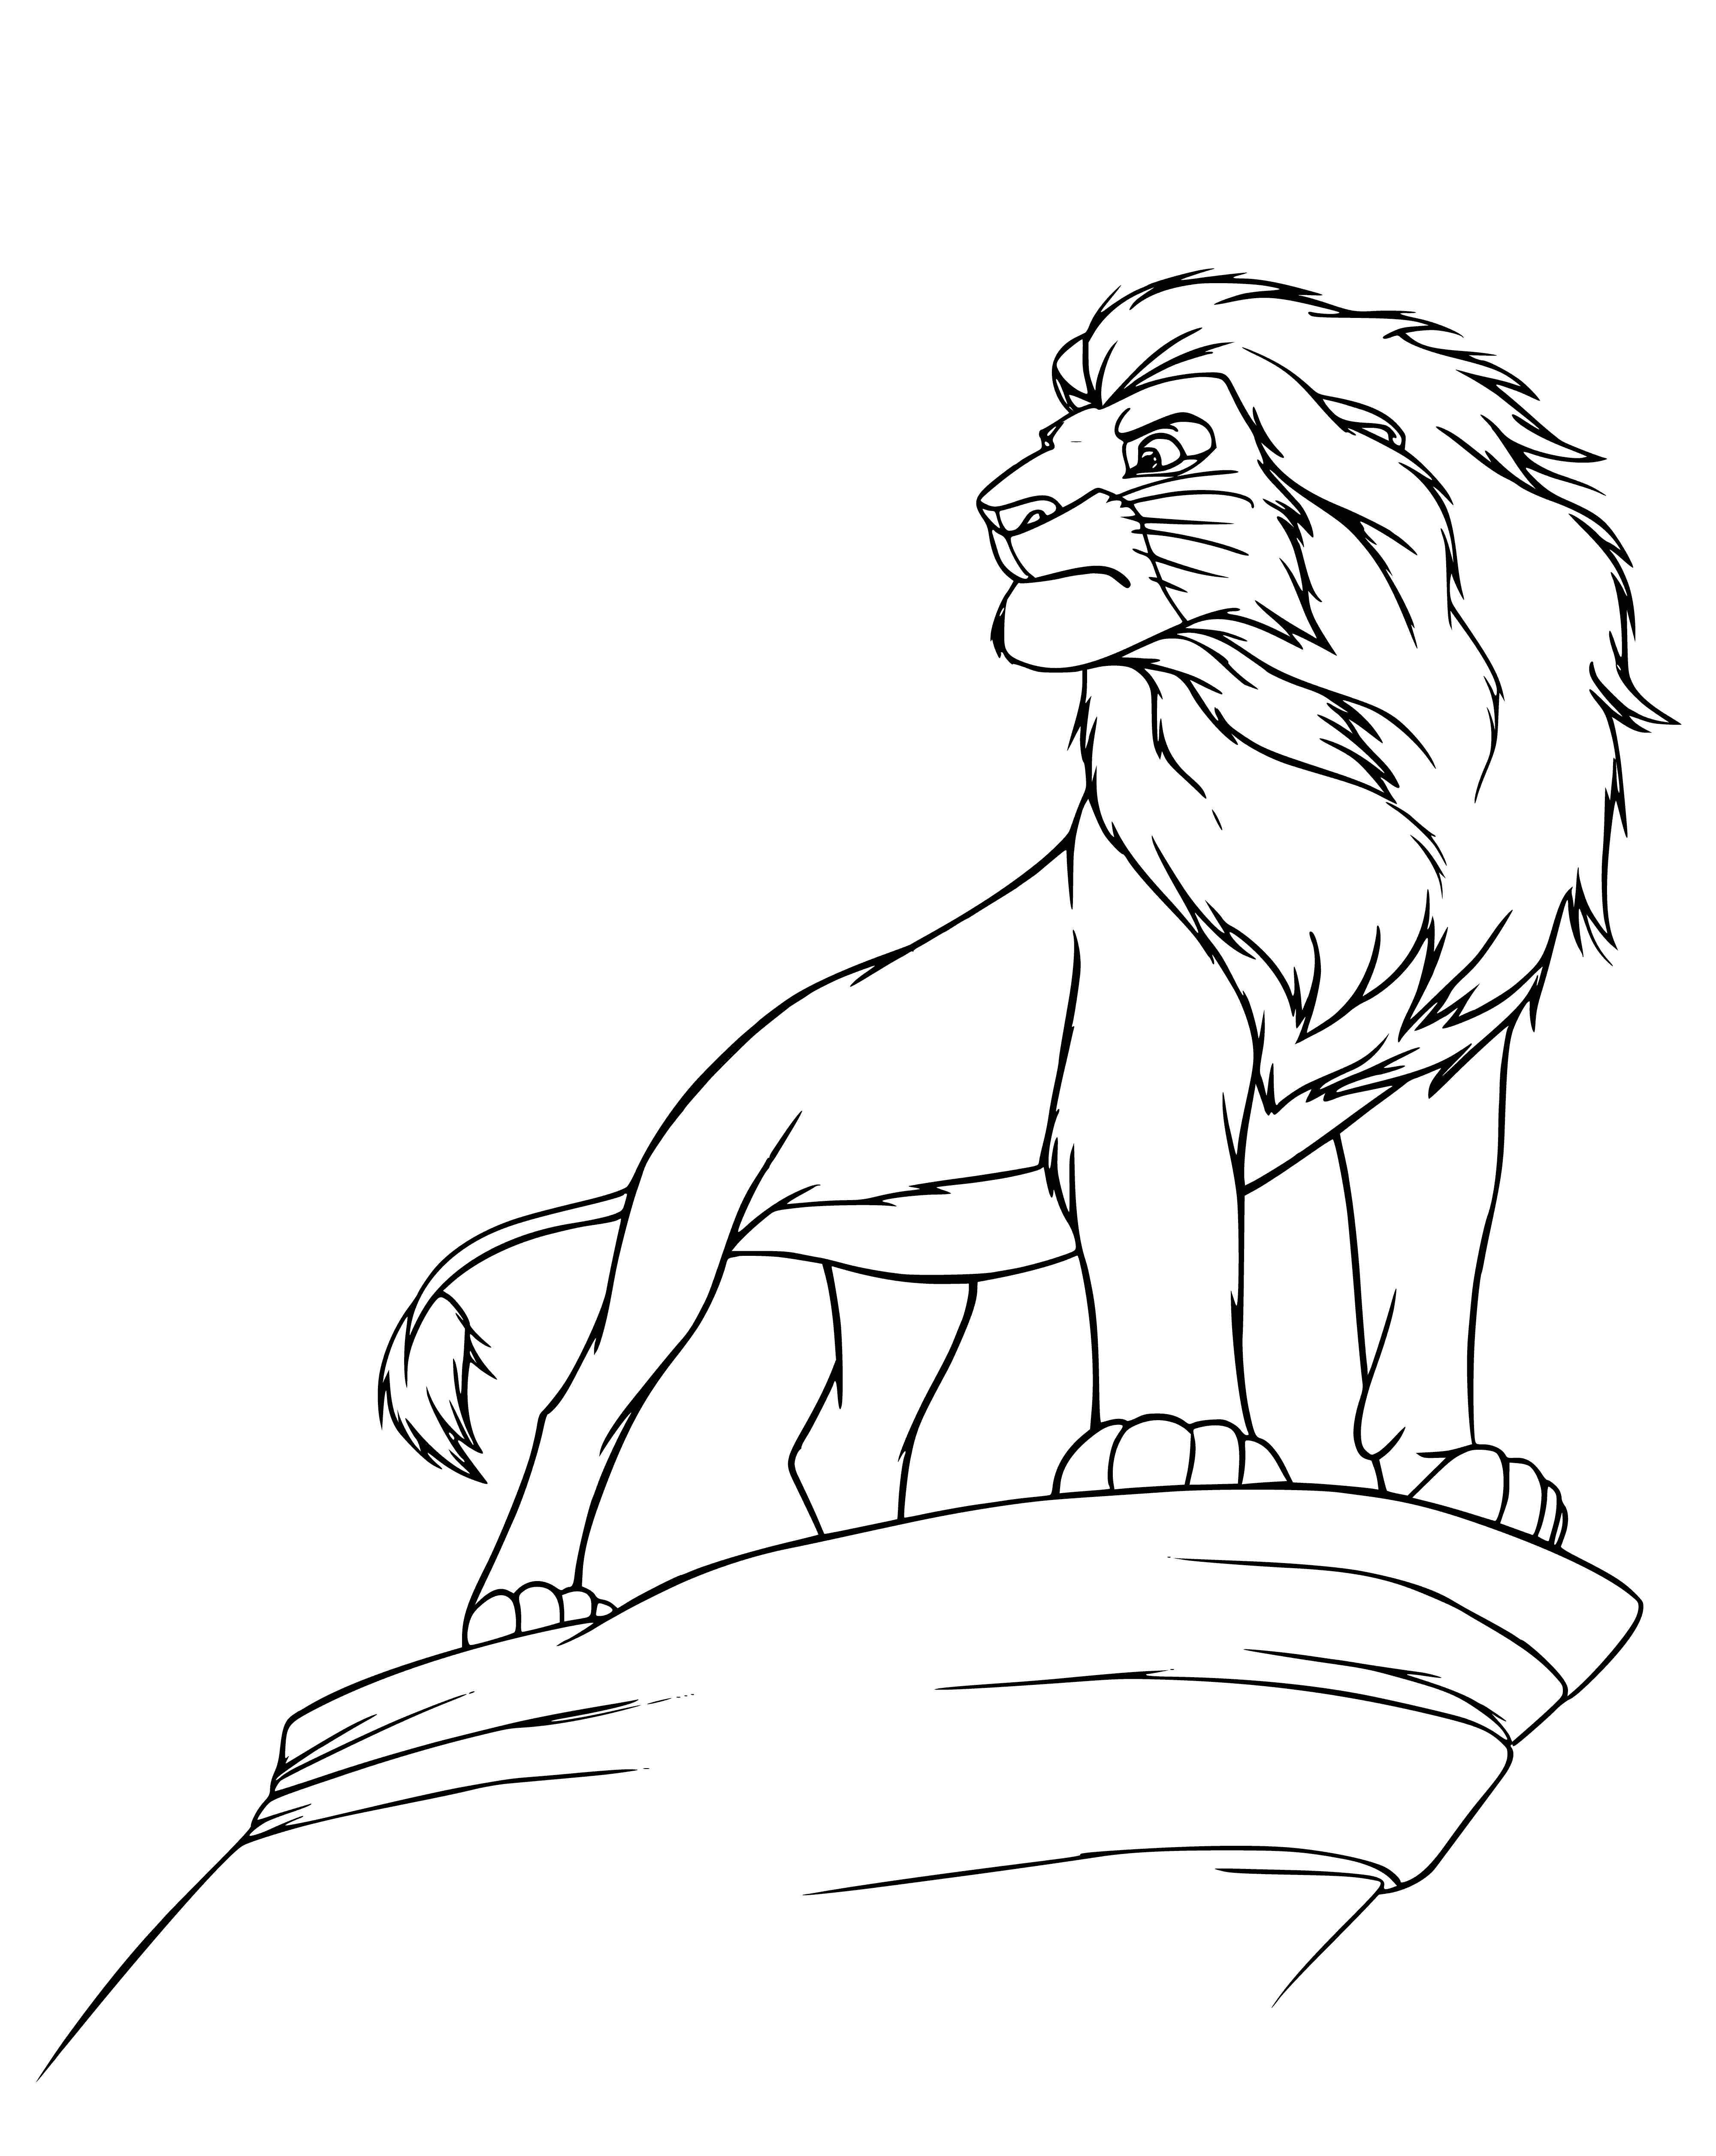 coloring page: Simba stands proud atop rocks, mane blowing, king of the world.